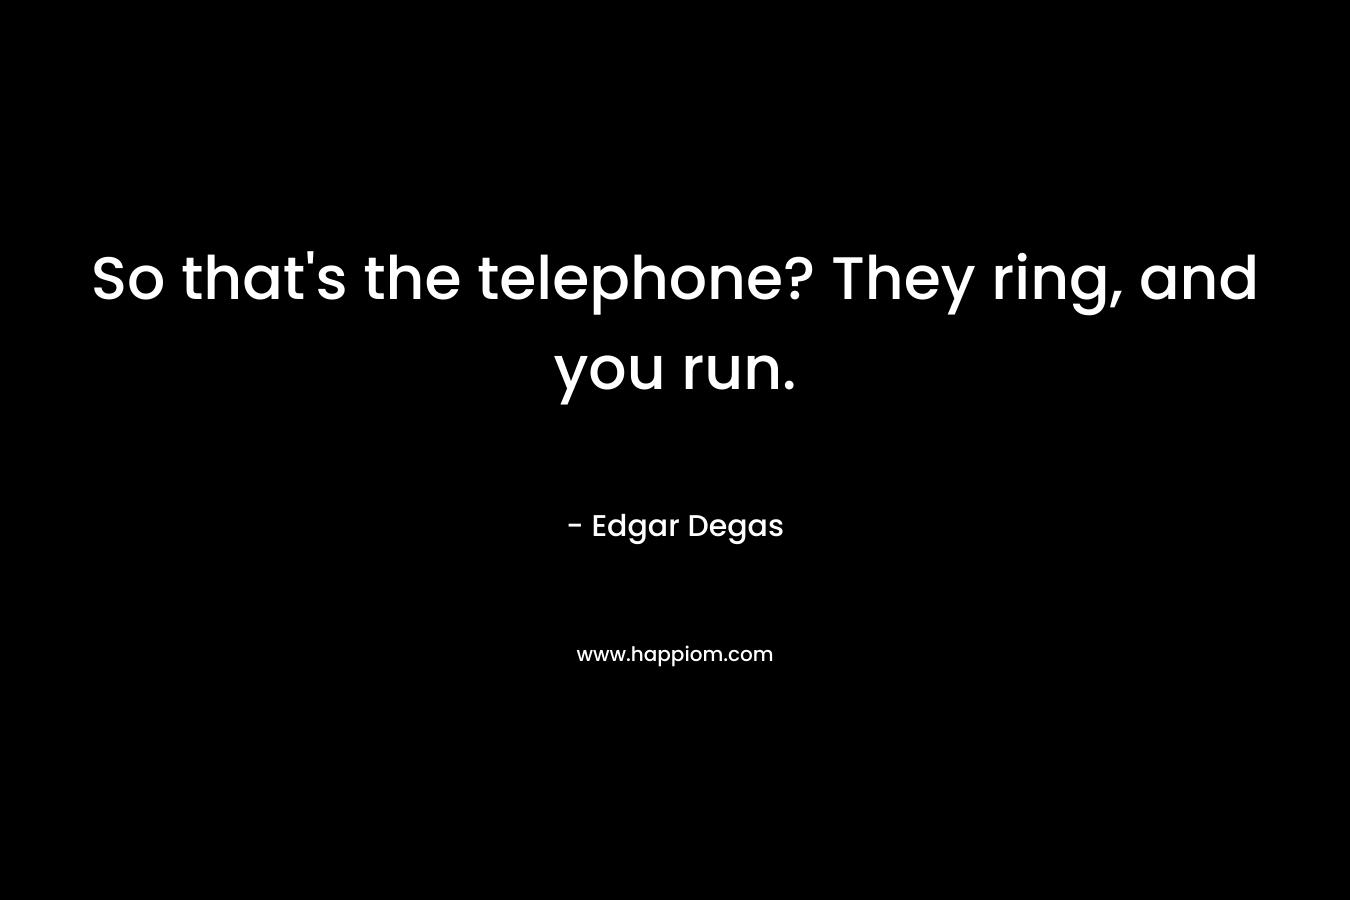 So that’s the telephone? They ring, and you run. – Edgar Degas